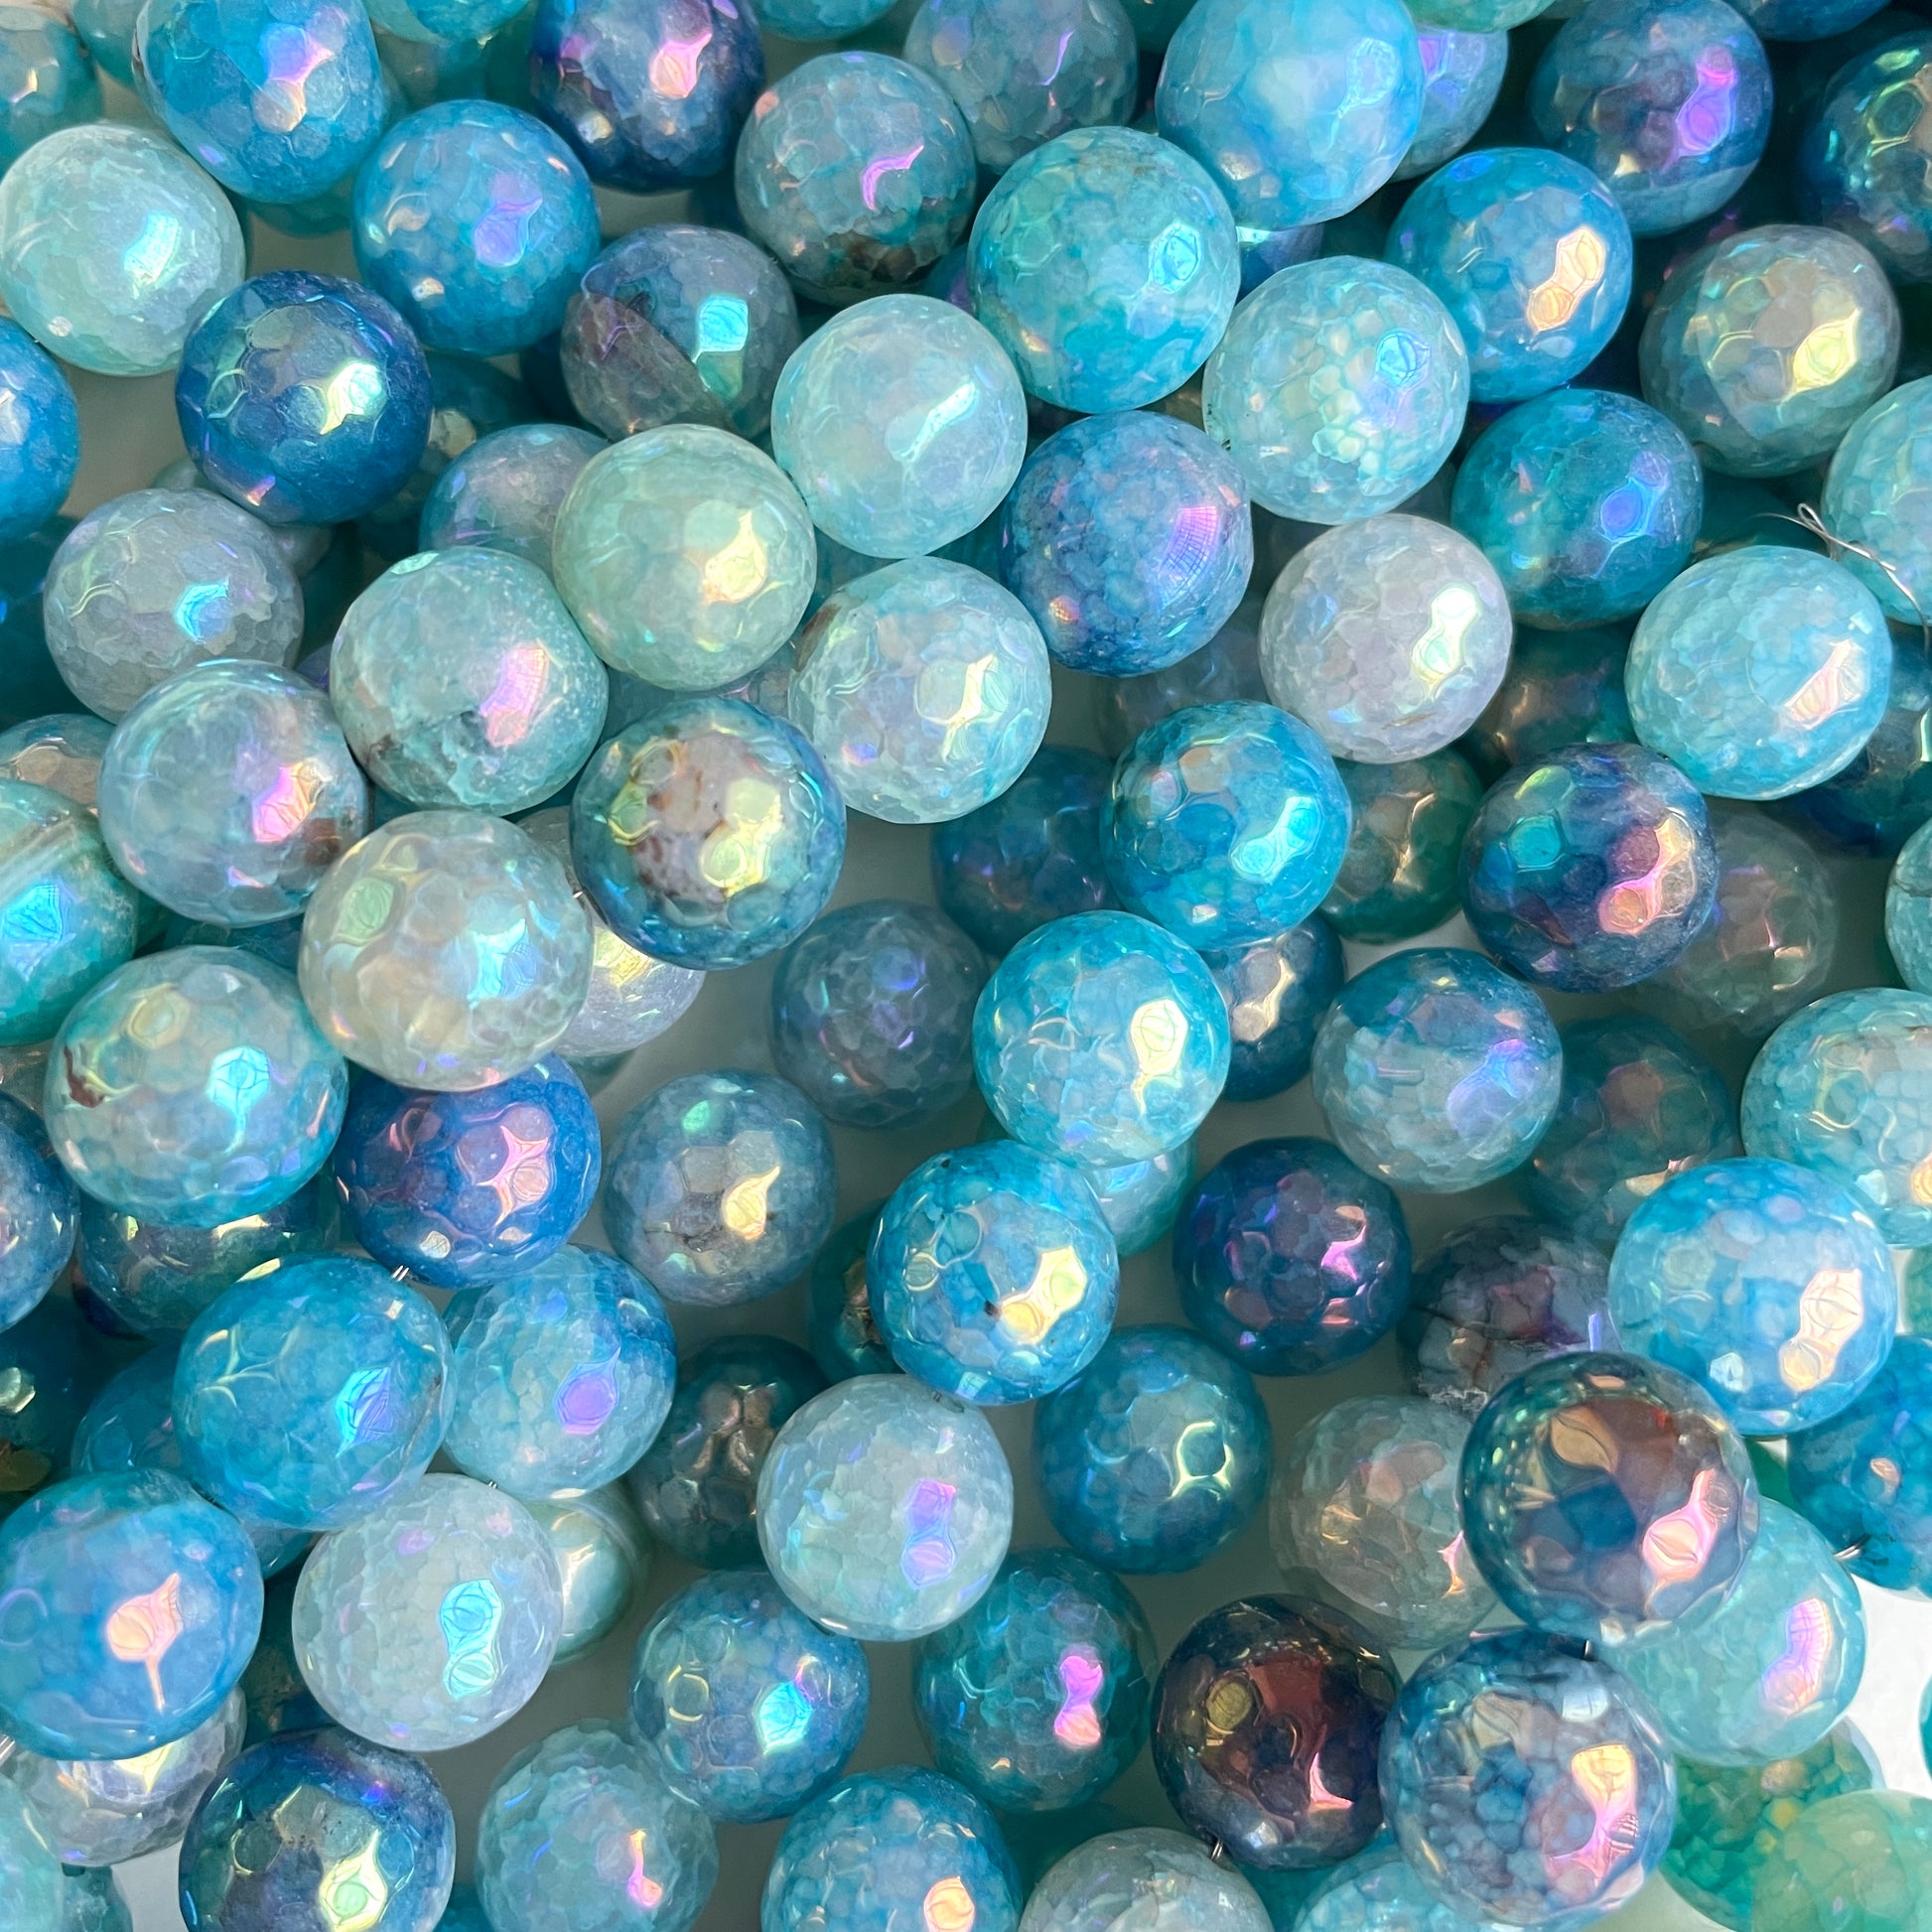 2 Strands/lot 10mm Electroplated AB Turquoise Blue Agate Faceted Stone Beads Electroplated Beads Electroplated Faceted Agate Beads New Beads Arrivals Charms Beads Beyond